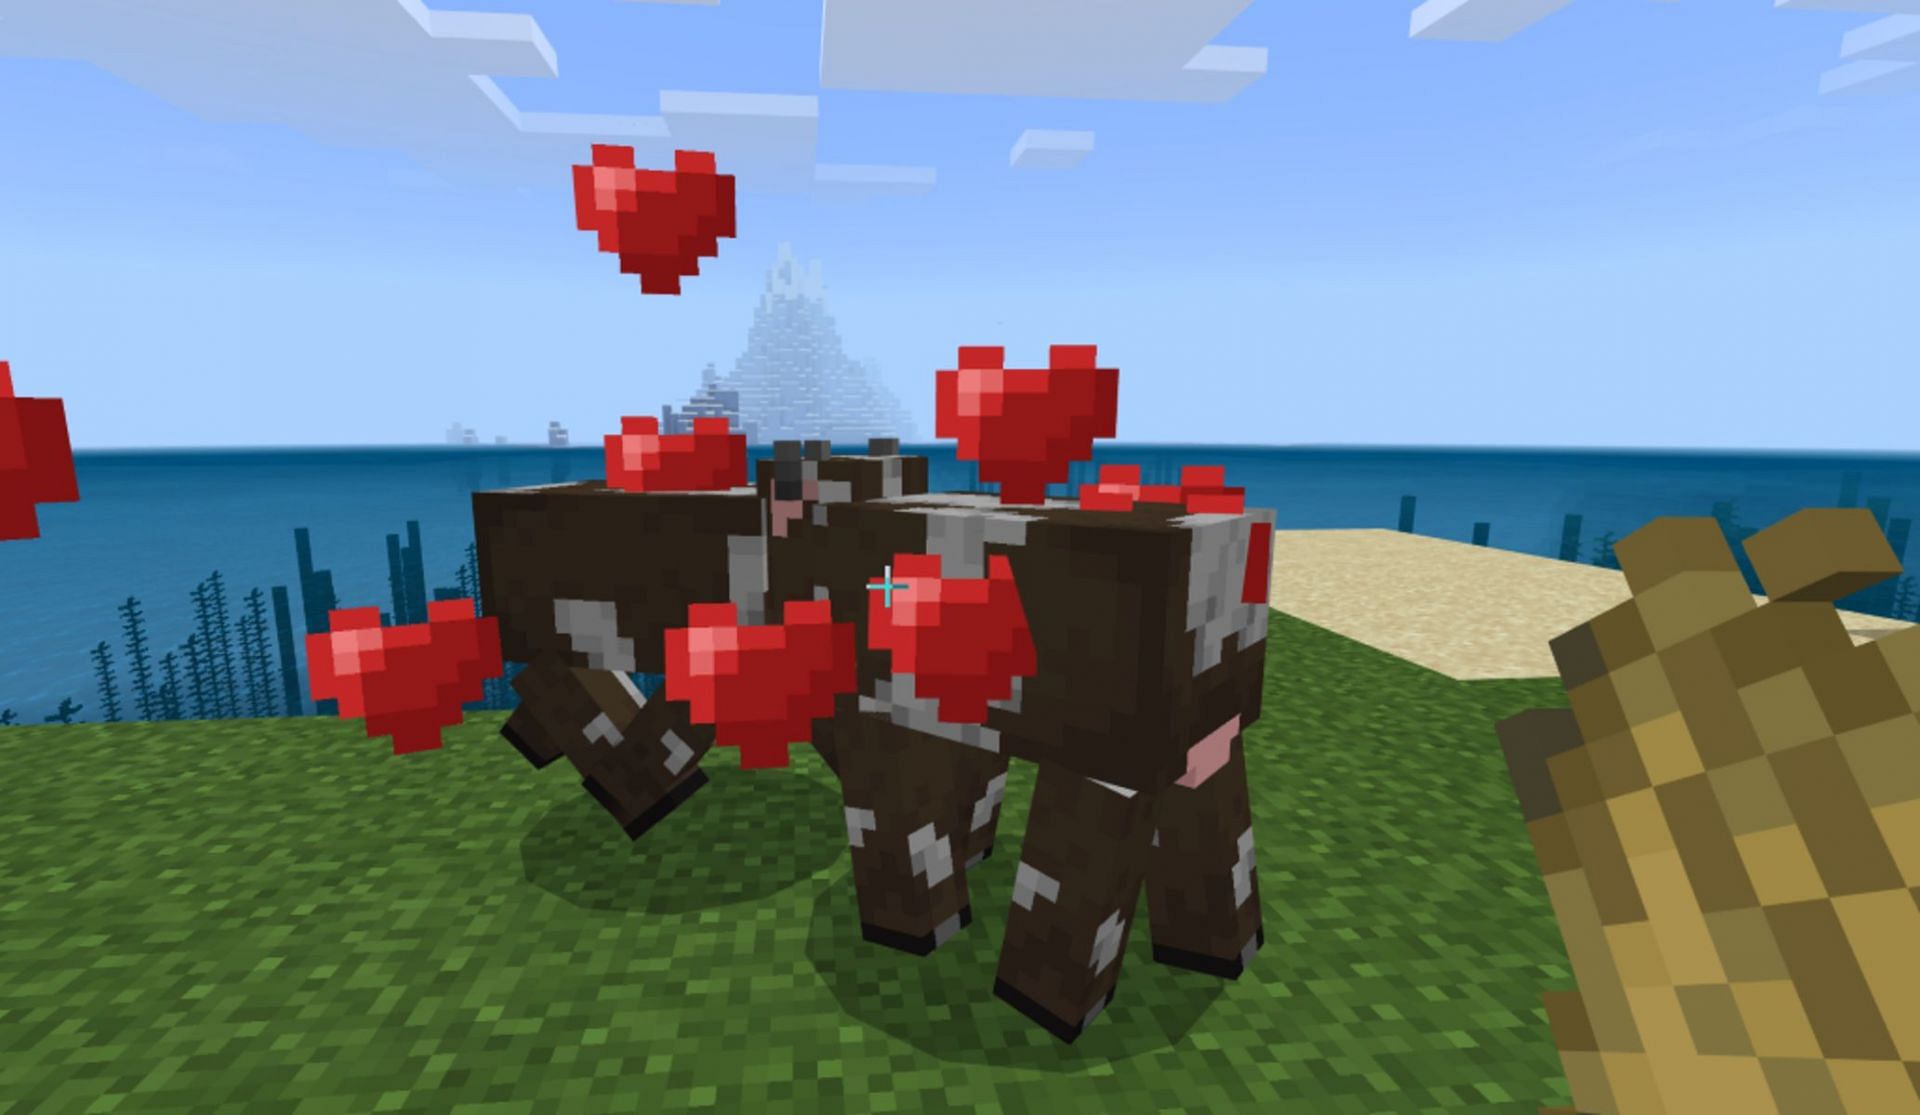 Two cows breeding while in love mode in the game (Image via Mojang)